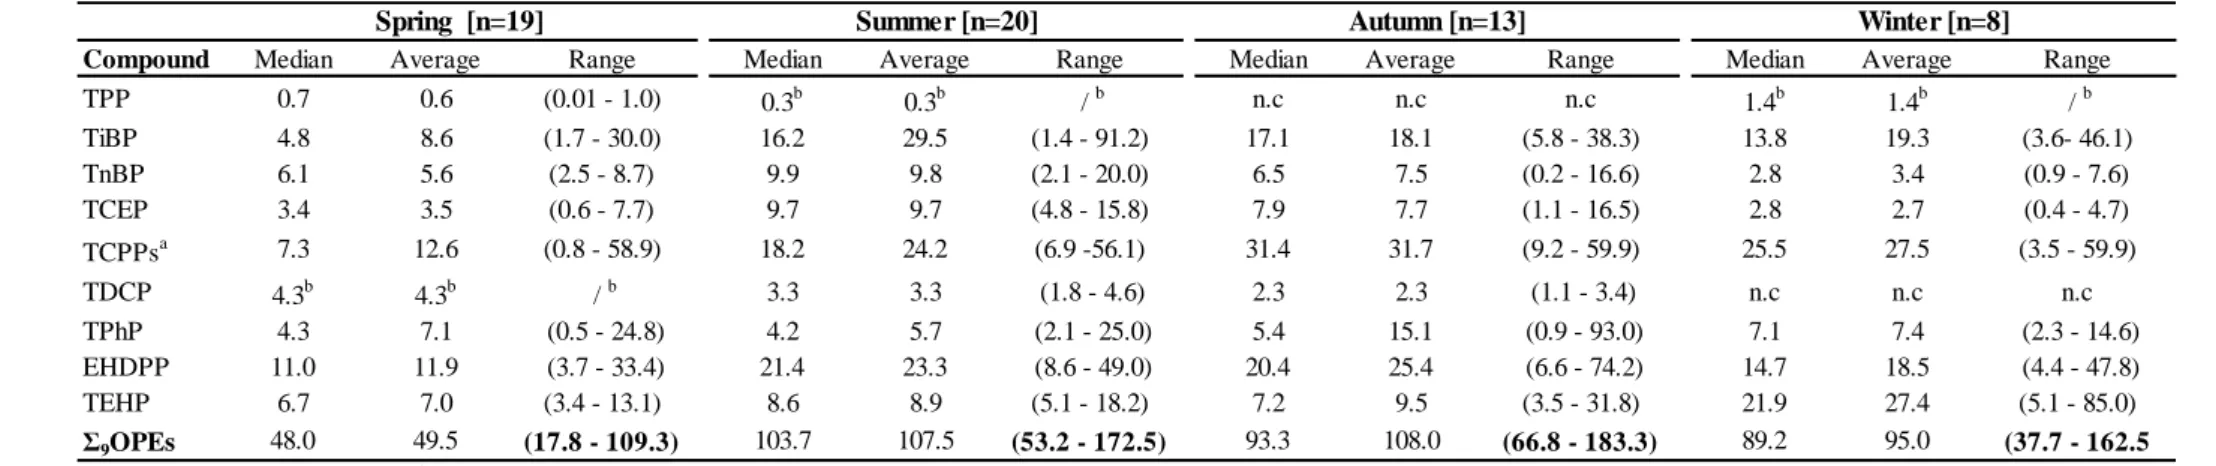 Table 2. OPE dry deposition fluxes (ng m -2  d -1 , median, average and range) in the different seasons (2015-2016) in Bizerte (Tunisia) 